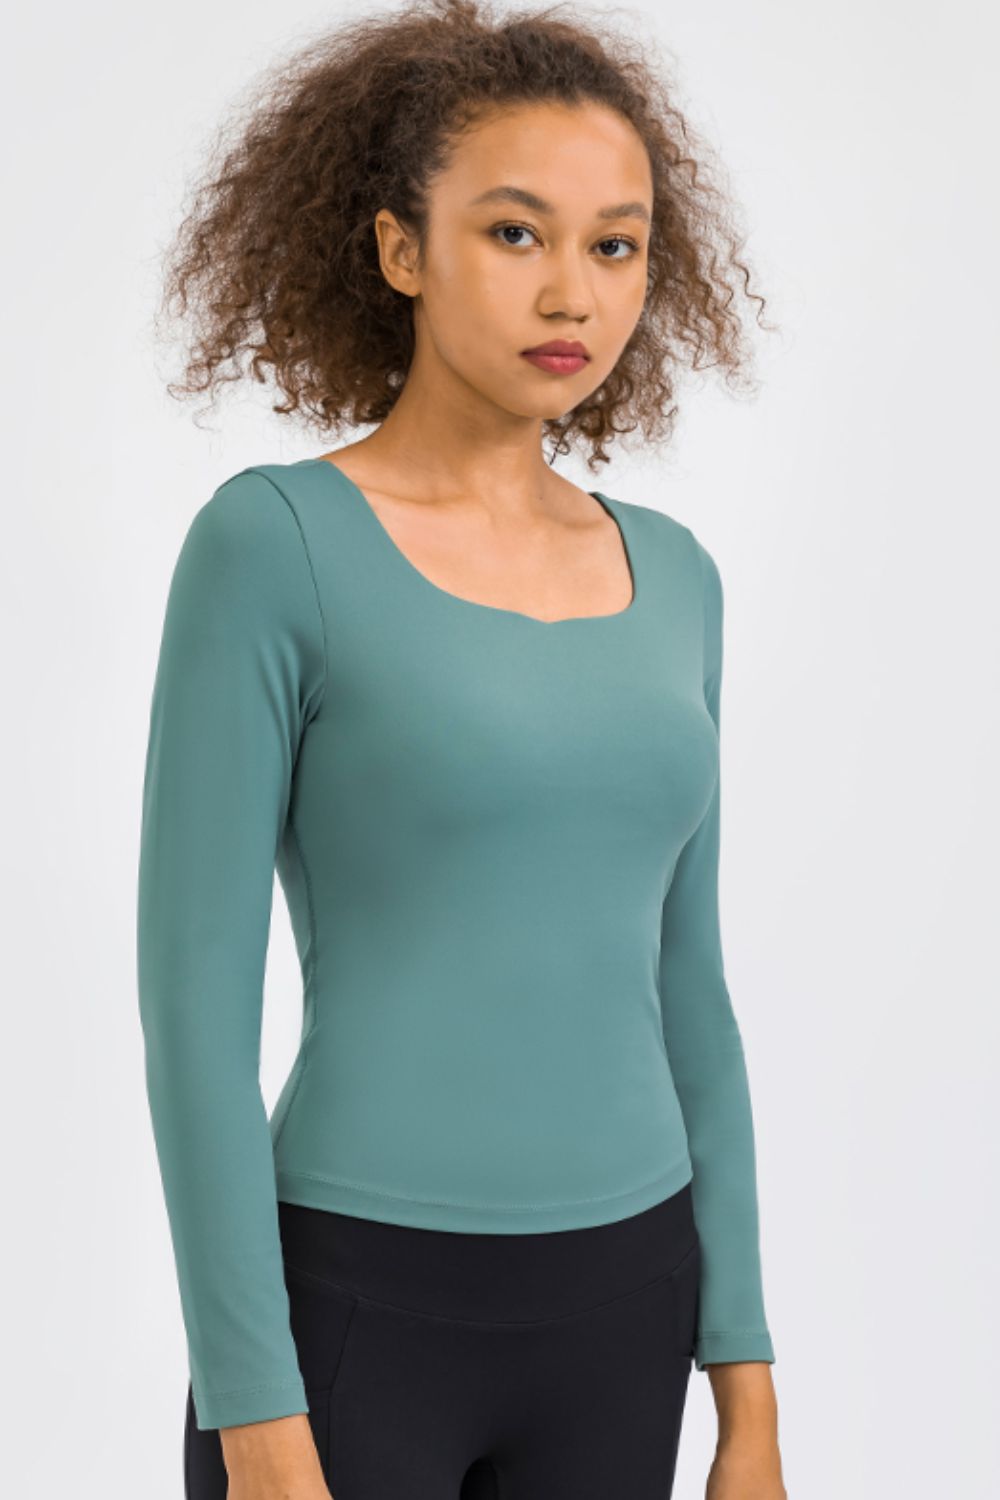 Feel Like Skin Highly Stretchy Long Sleeve Sports Top - DromedarShop.com Online Boutique